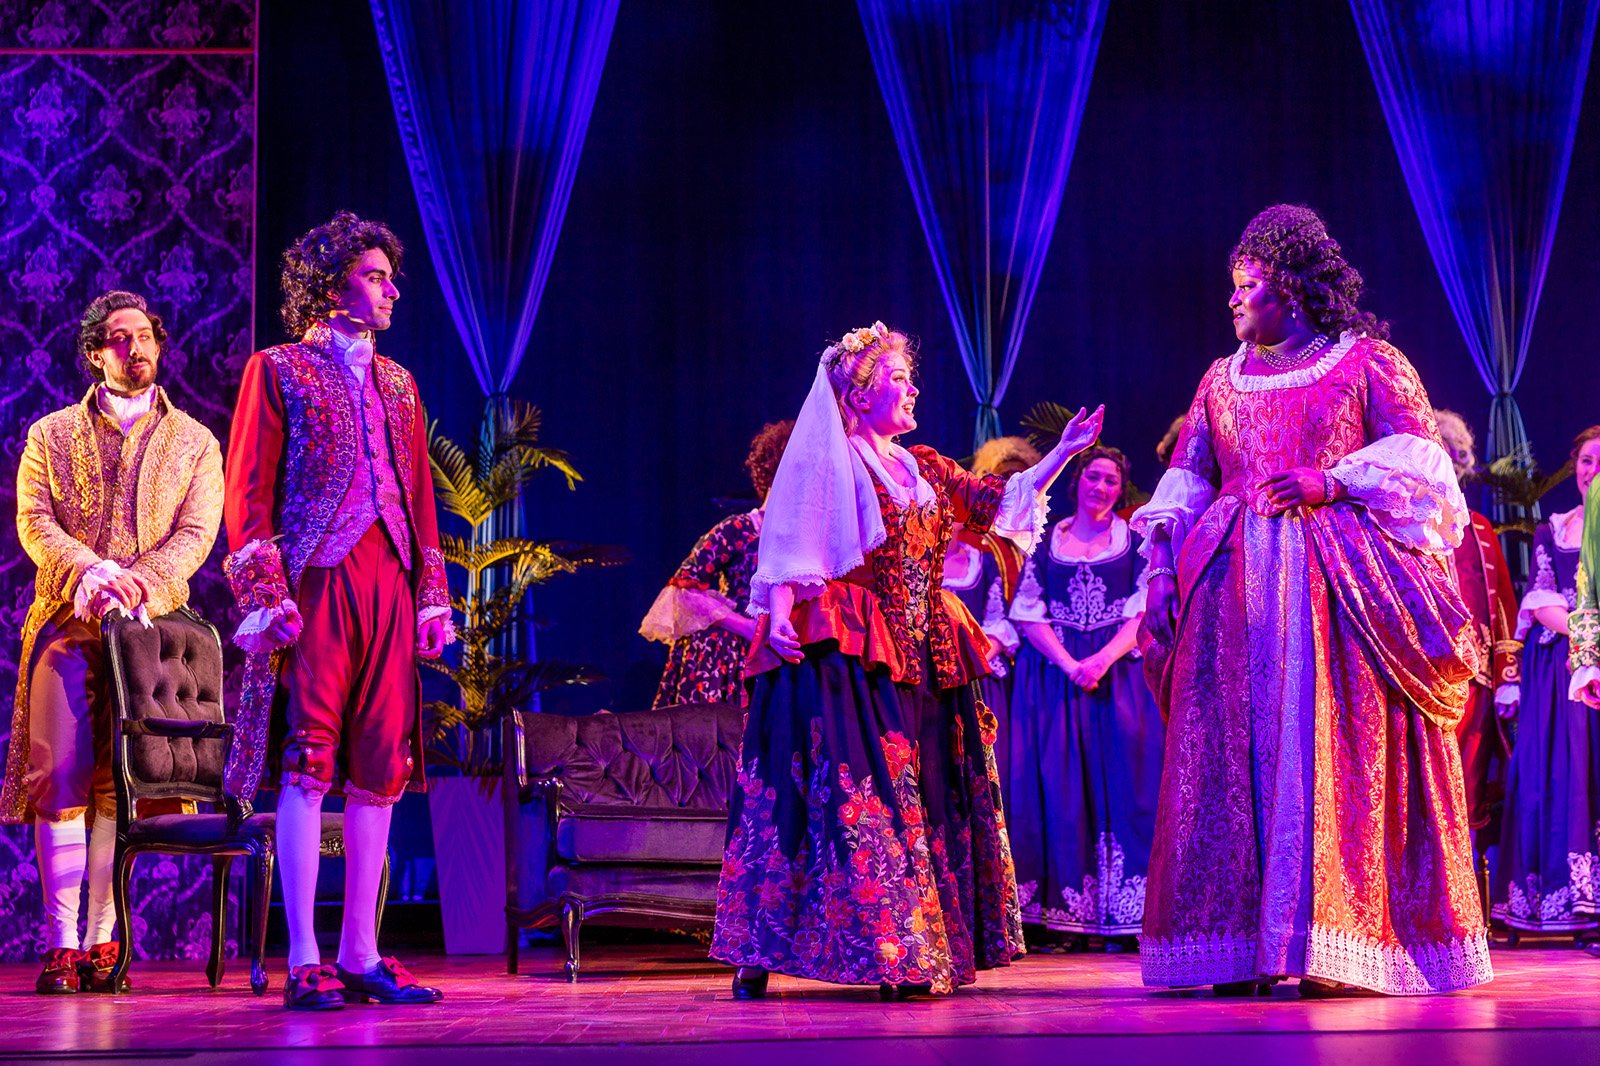 "The Anonymous Lover - A Co-Production with Boston Lyric Opera and Opera Philadelphia (Boston, MA.) - REVIEW